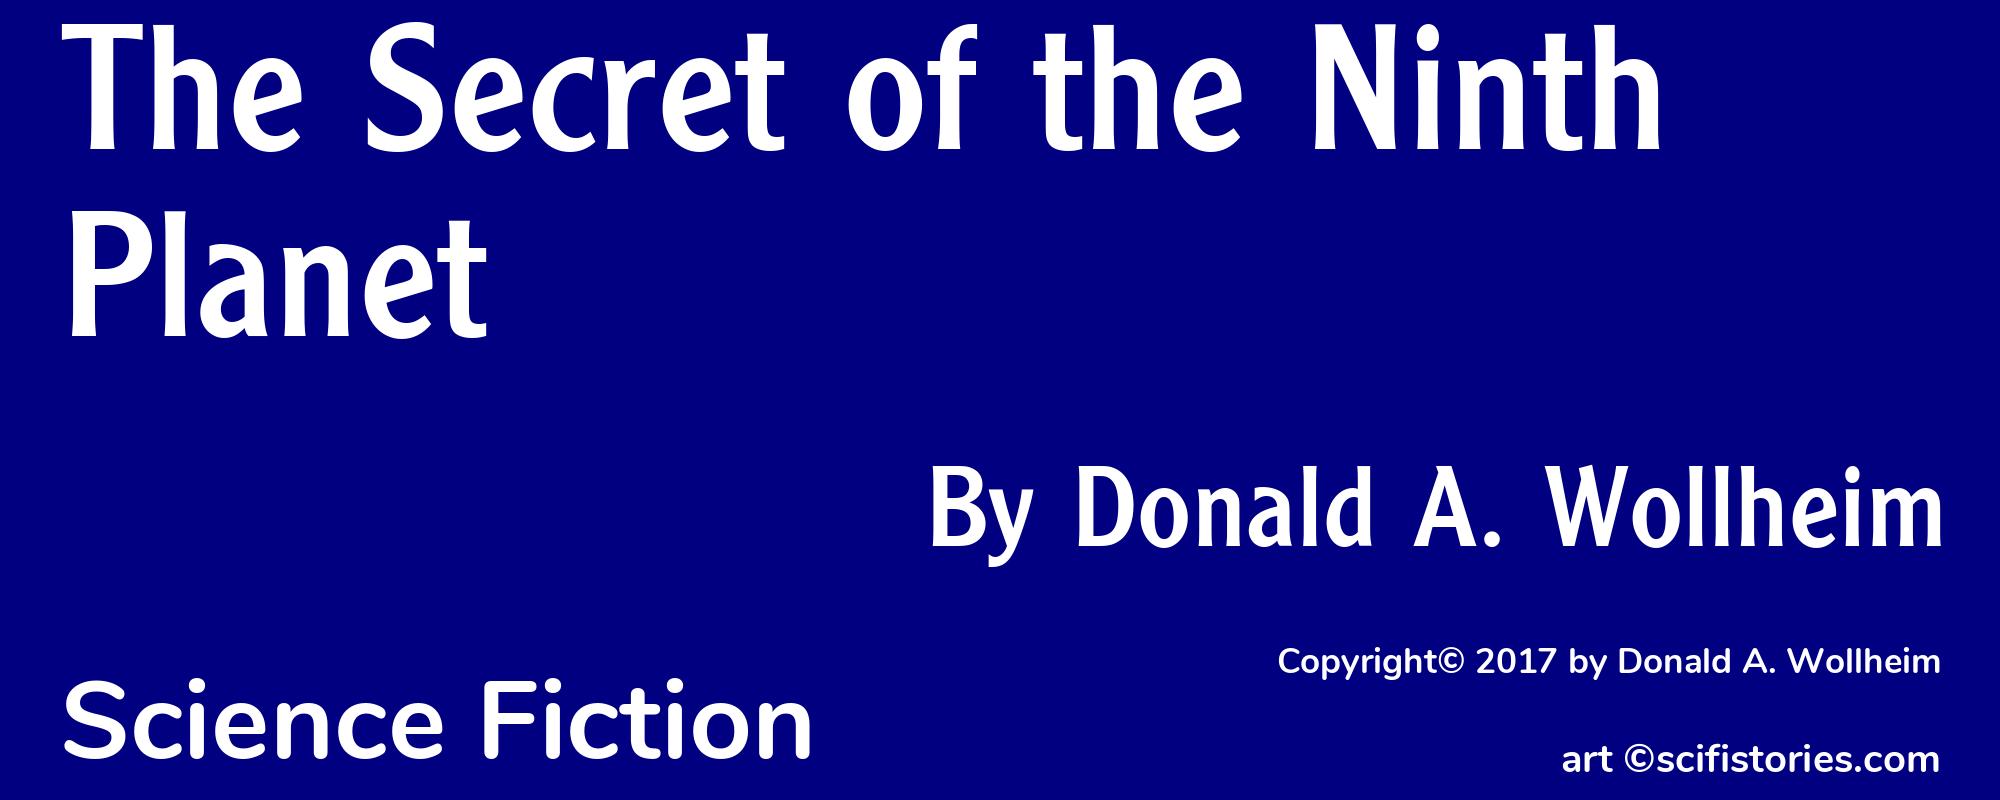 The Secret of the Ninth Planet - Cover